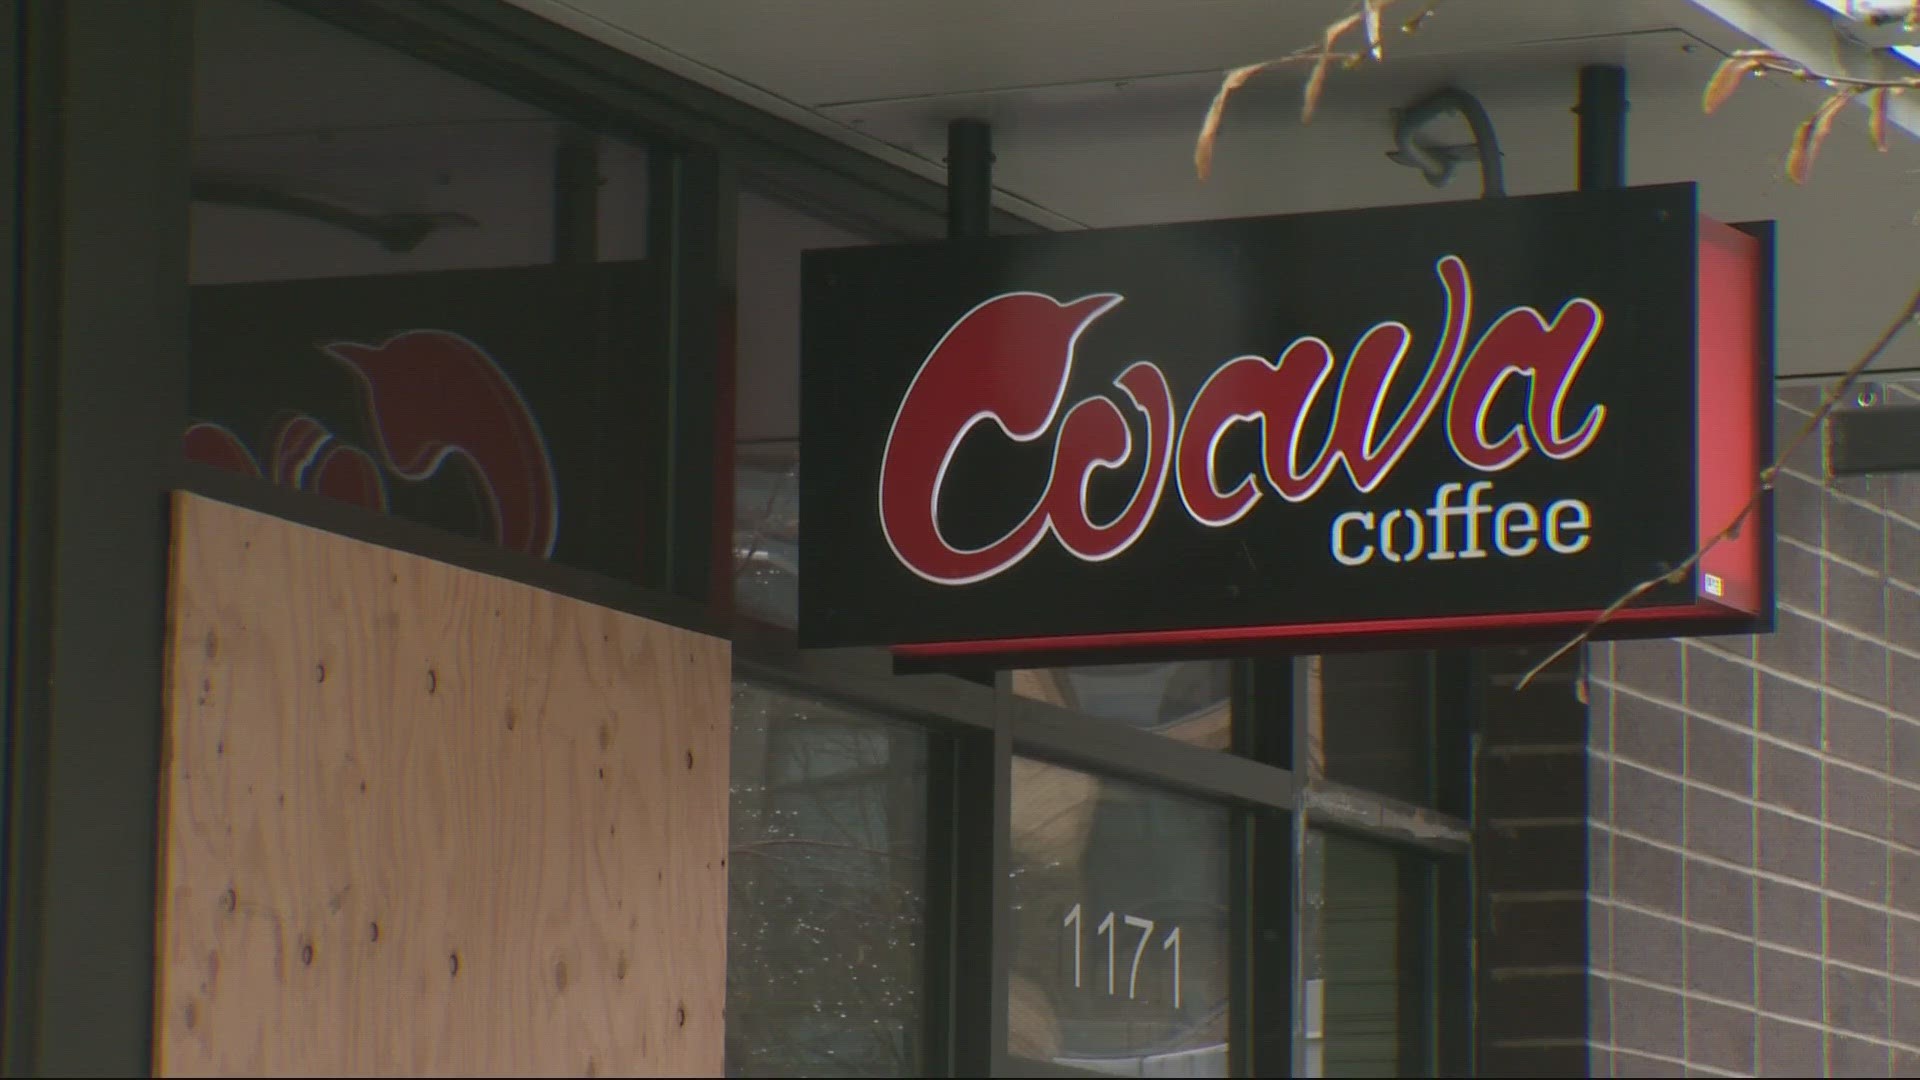 Coava Coffee is the latest business to close near Southwest 12th and Jefferson, citing increased violence and crime.